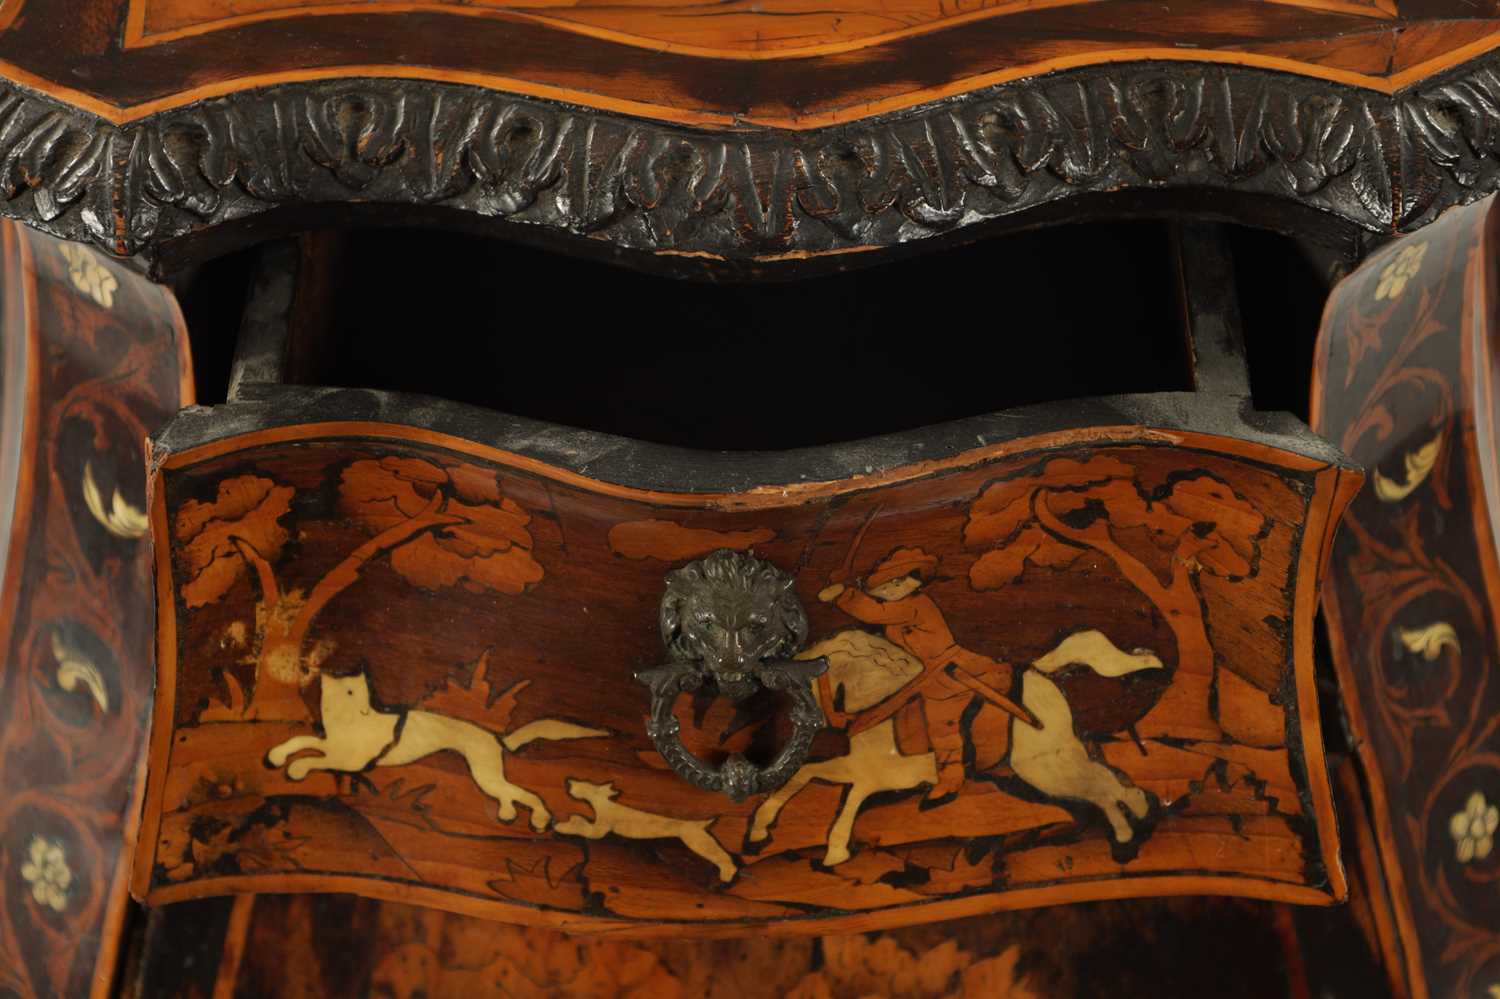 AN EARLY 18TH CENTURY ITALIAN MARQUETRY AND BONE INLAID COMMODE OF SMALL SIZE - Image 6 of 9